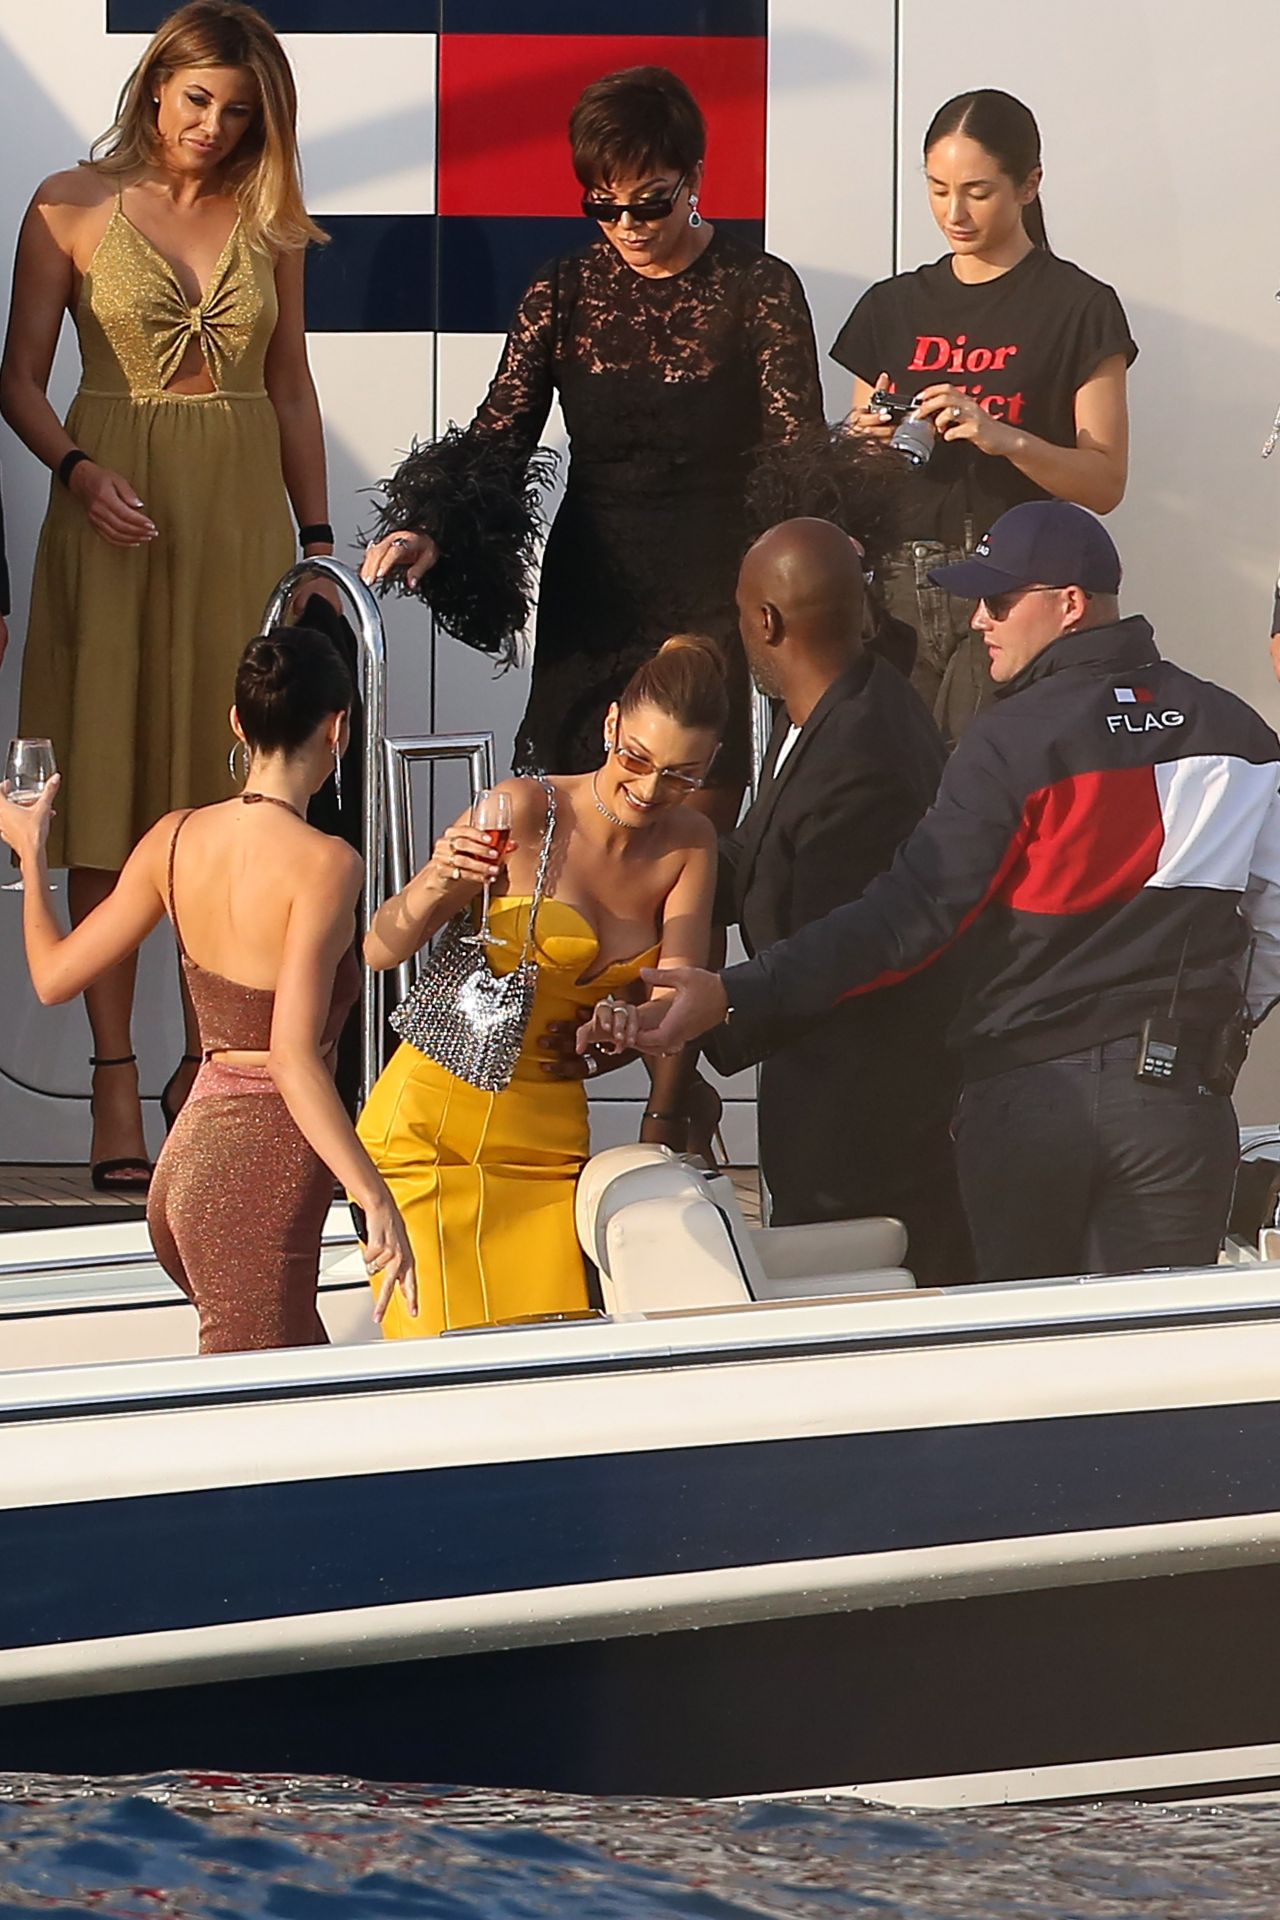 bella-hadid-and-kendall-jenner-tommy-hilfigers-yacht-in-monaco-05-25-2019-14.jpg